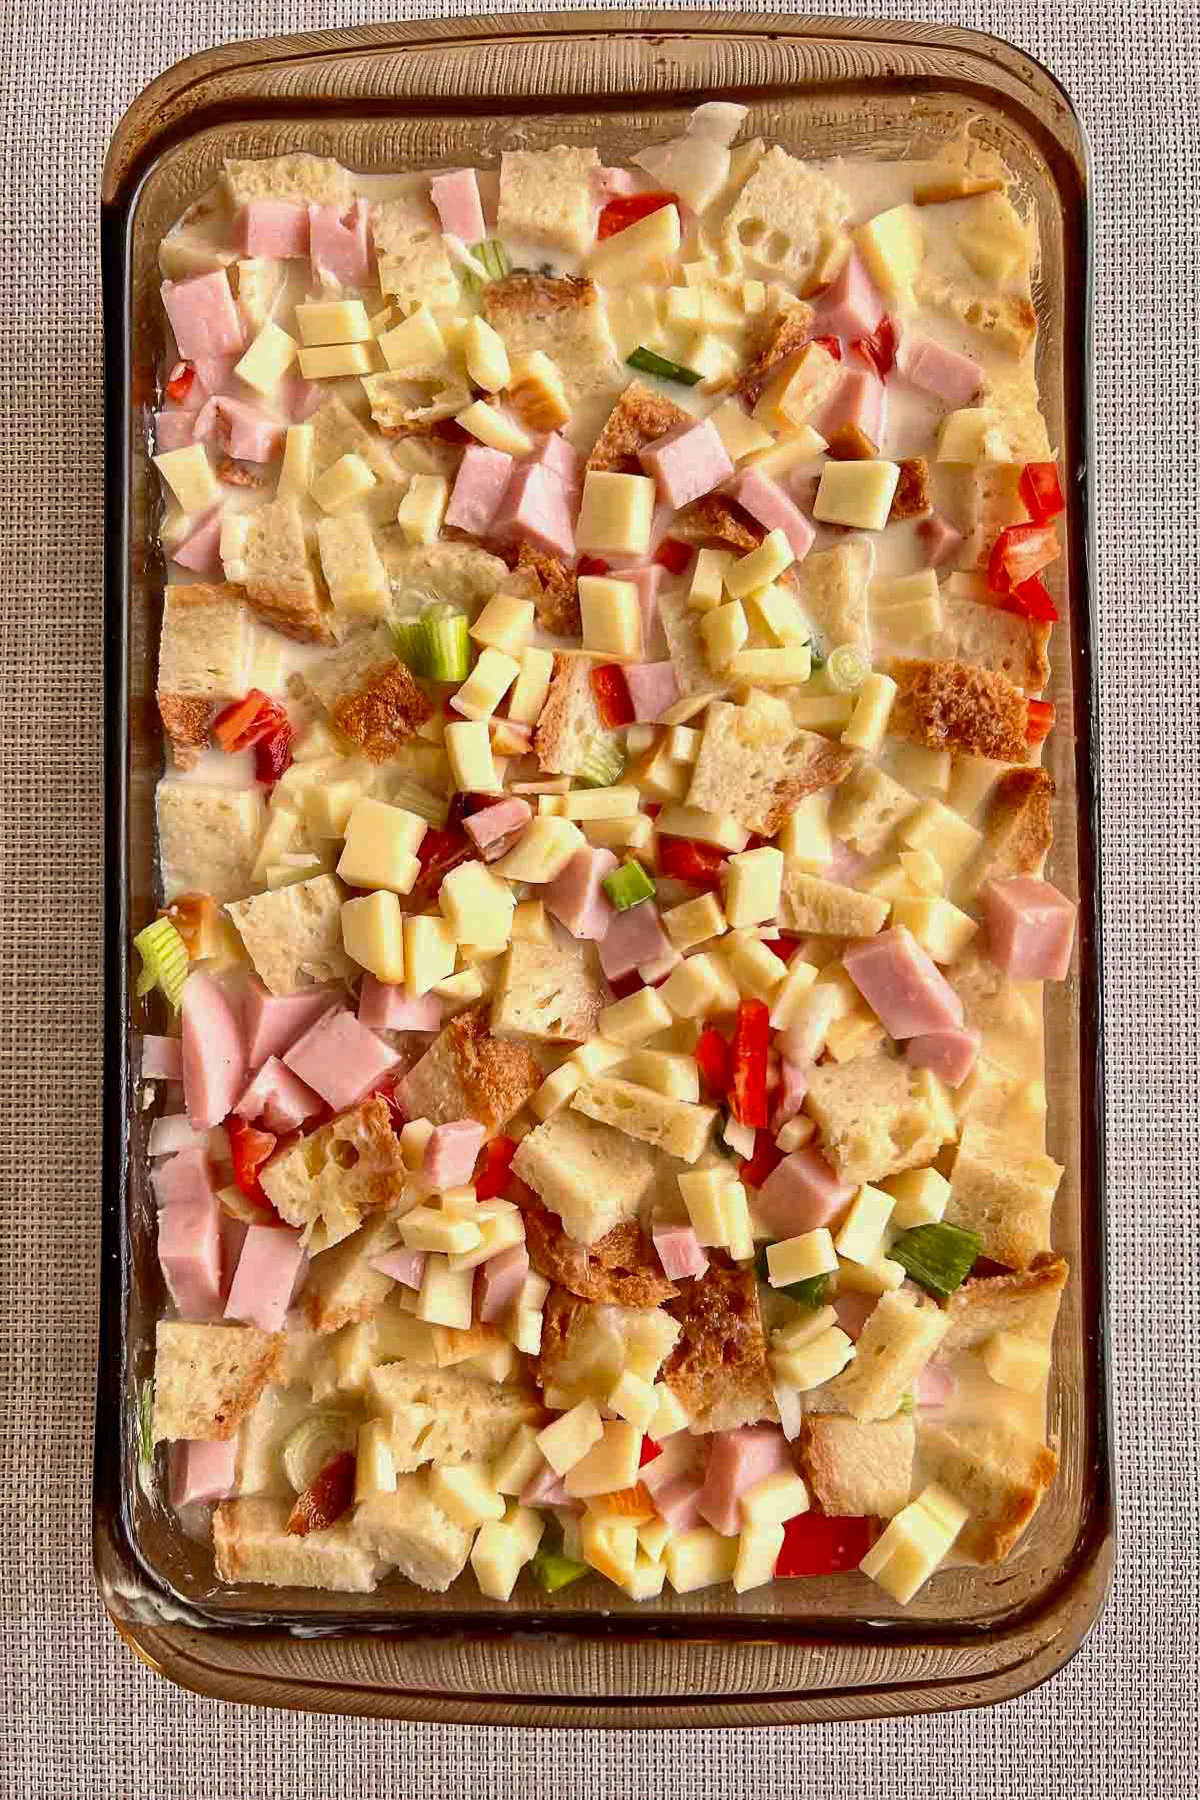 Unbaked Ham And Cheese Strata in a glass baking dish.